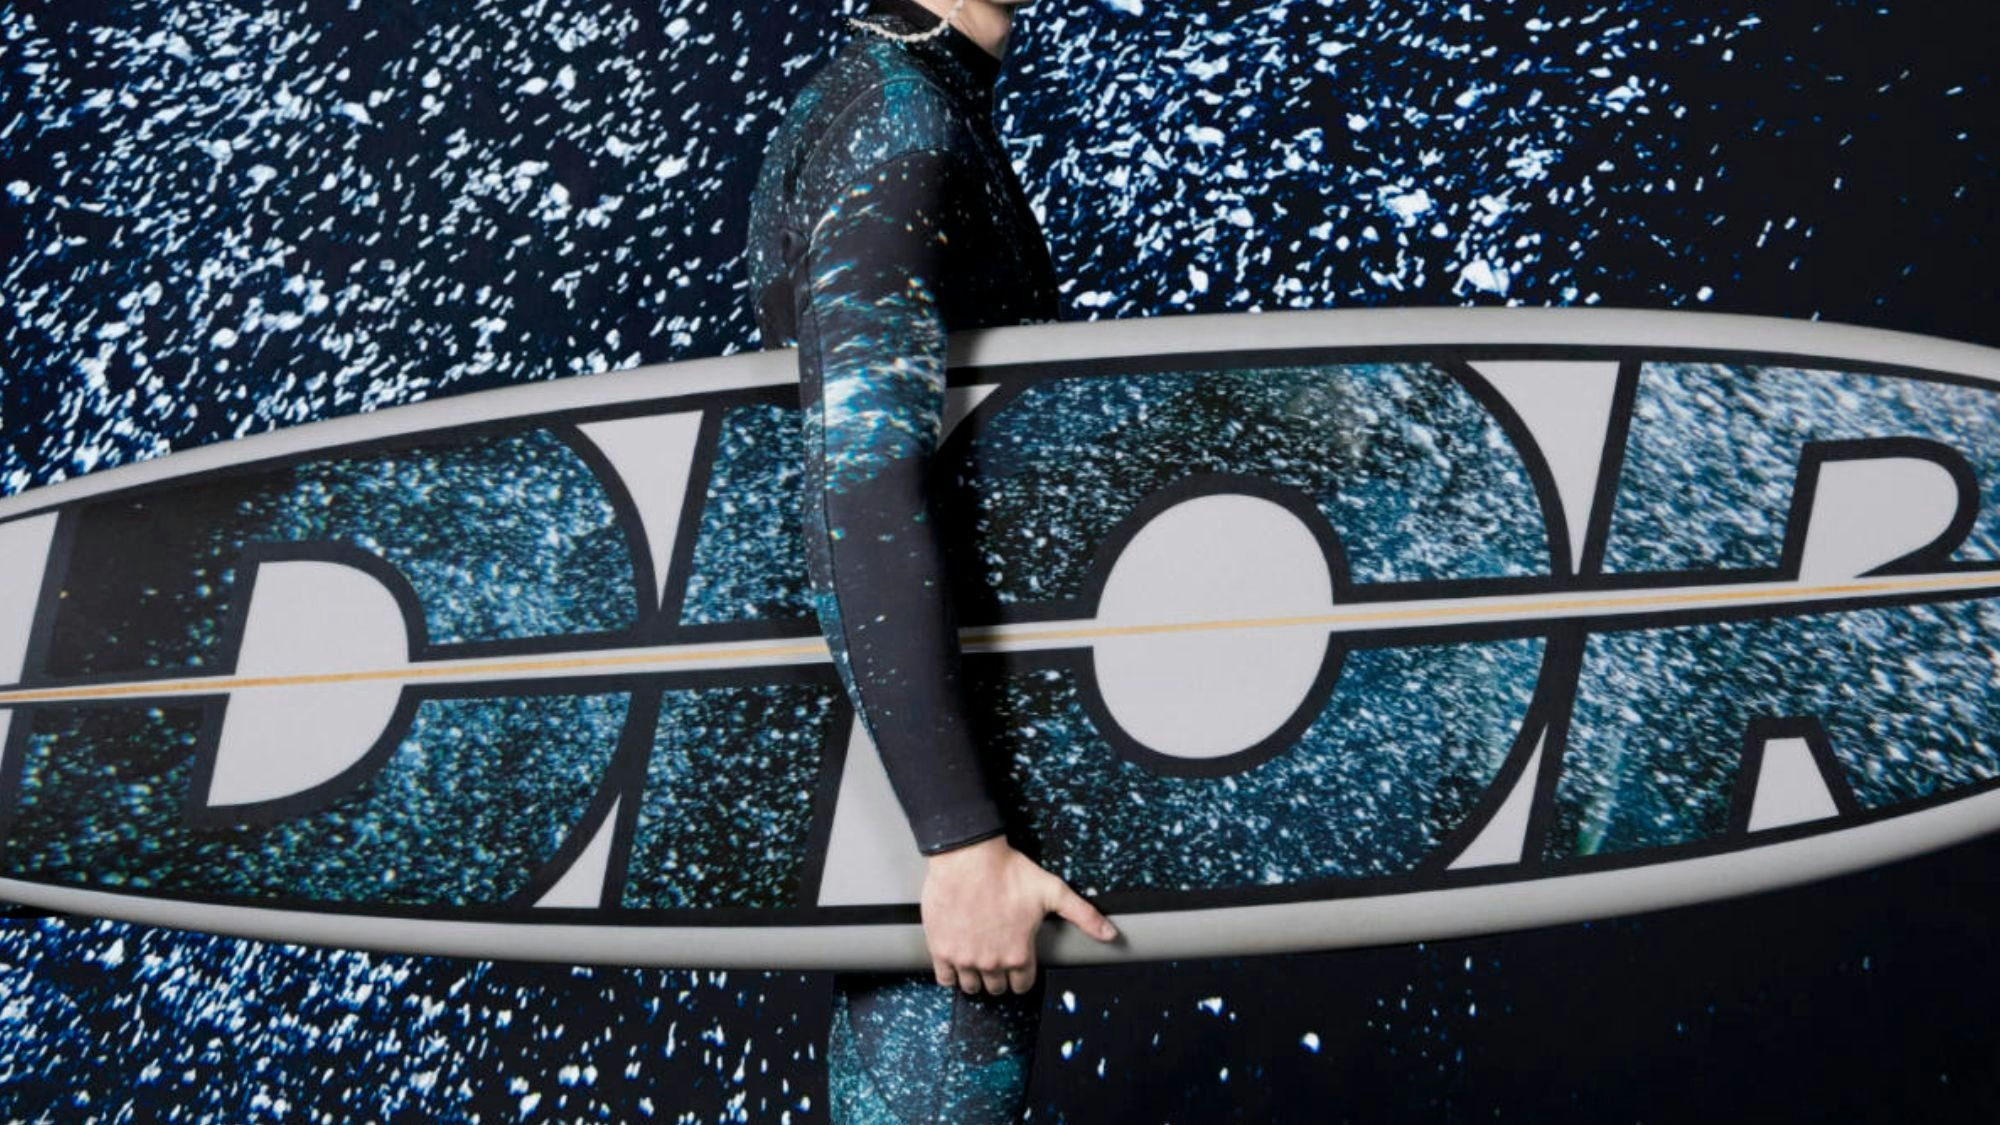 Dior and Parley For The Oceans's 96 percent eco-responsible collection is arriving in May. Photo: Dior